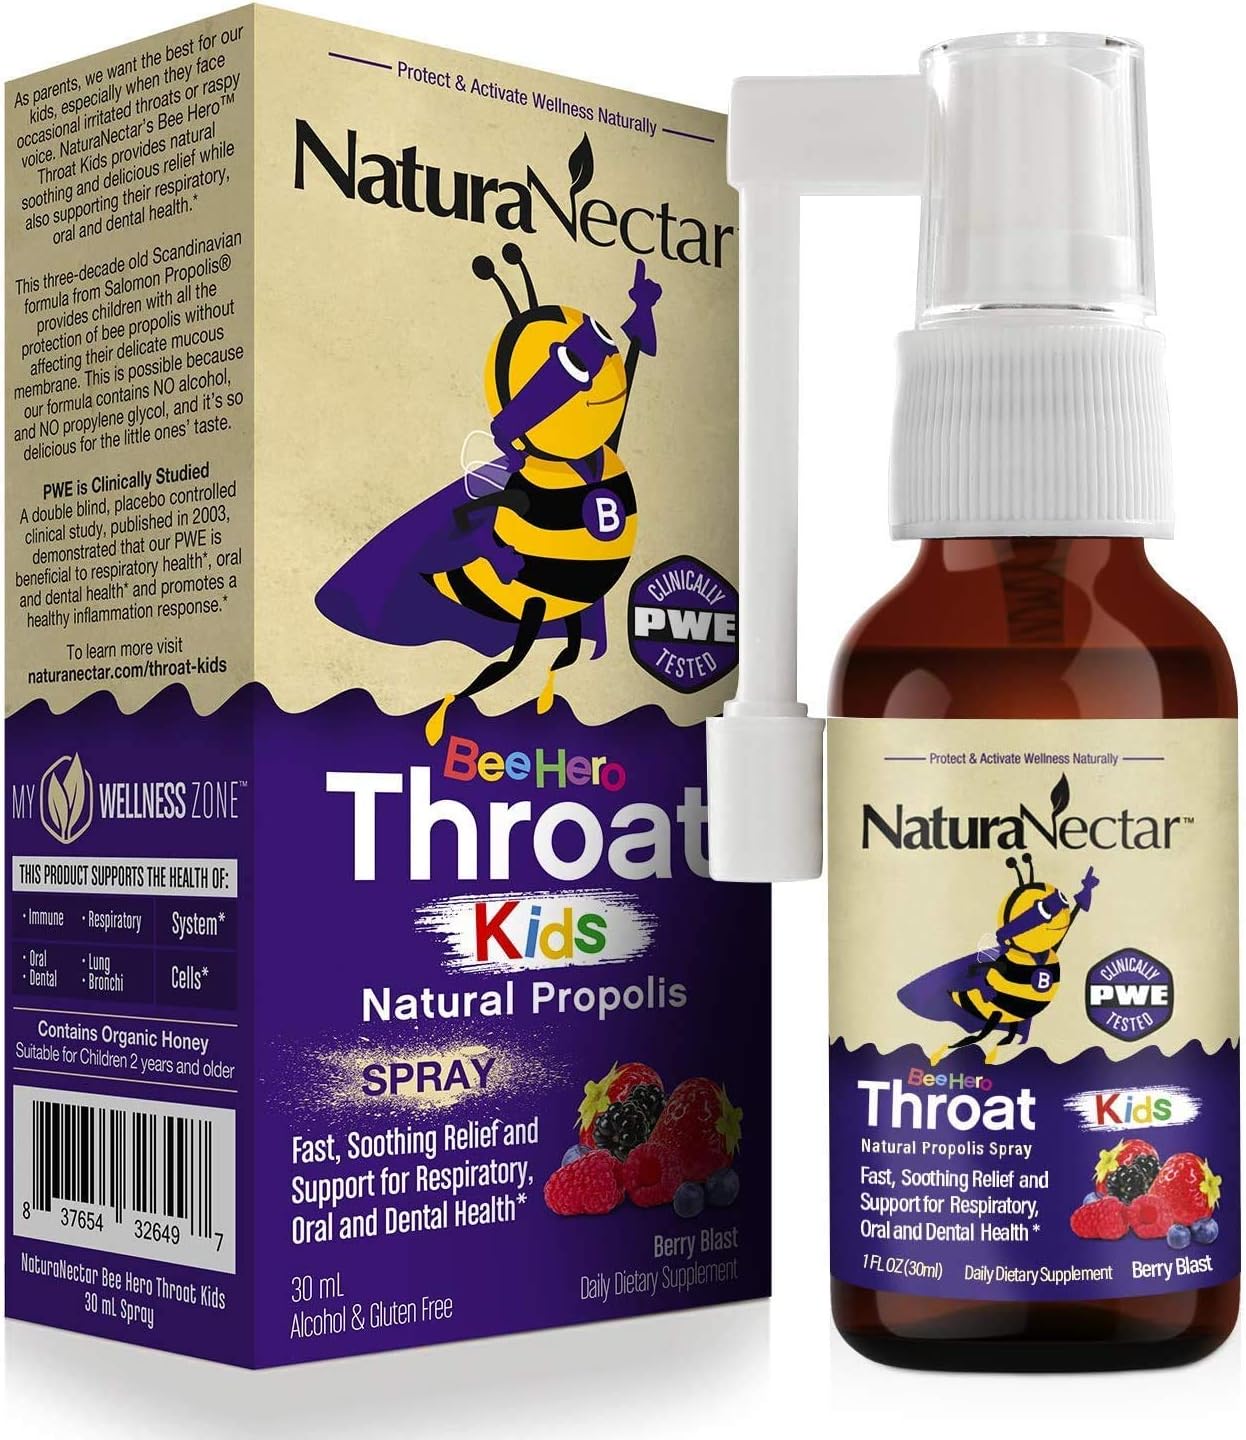 BeeHero™ Throat Kids Exclusive Propolis Spray, 30 mL | Clinically Tested PWE Extract | Berry Blast Flavor